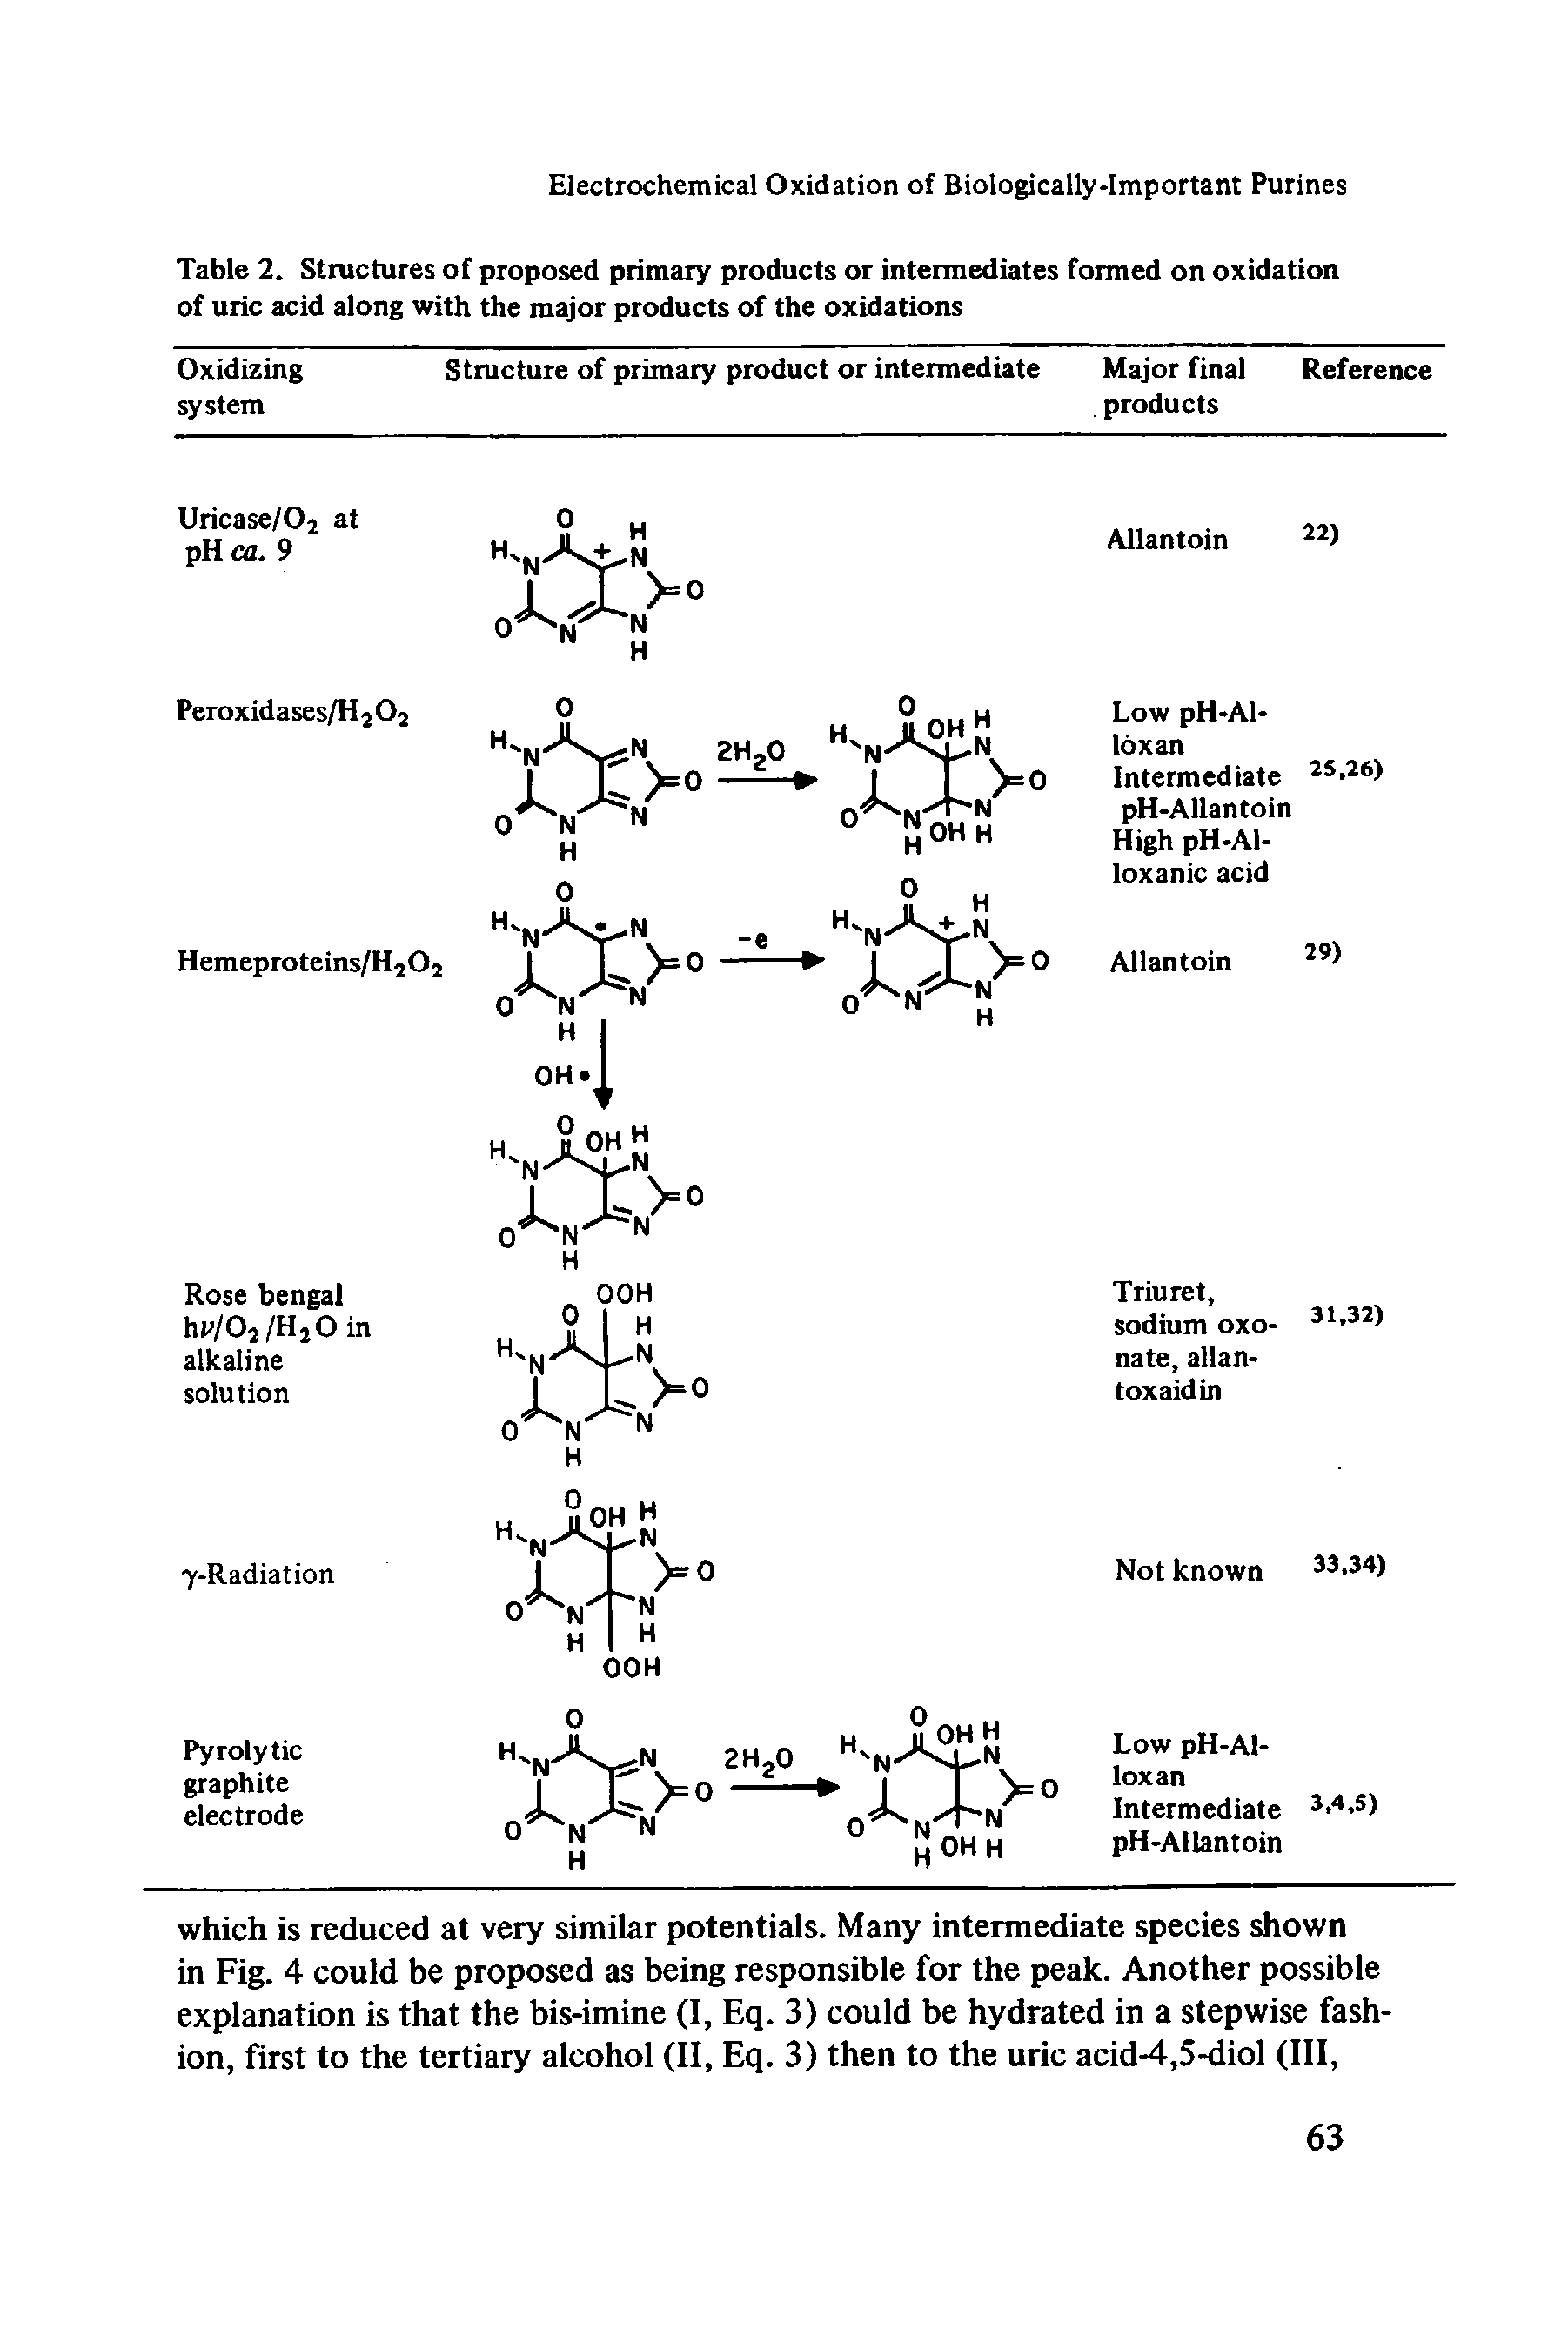 Table 2. Structures of proposed primary products or intermediates formed on oxidation of uric acid along with the major products of the oxidations...